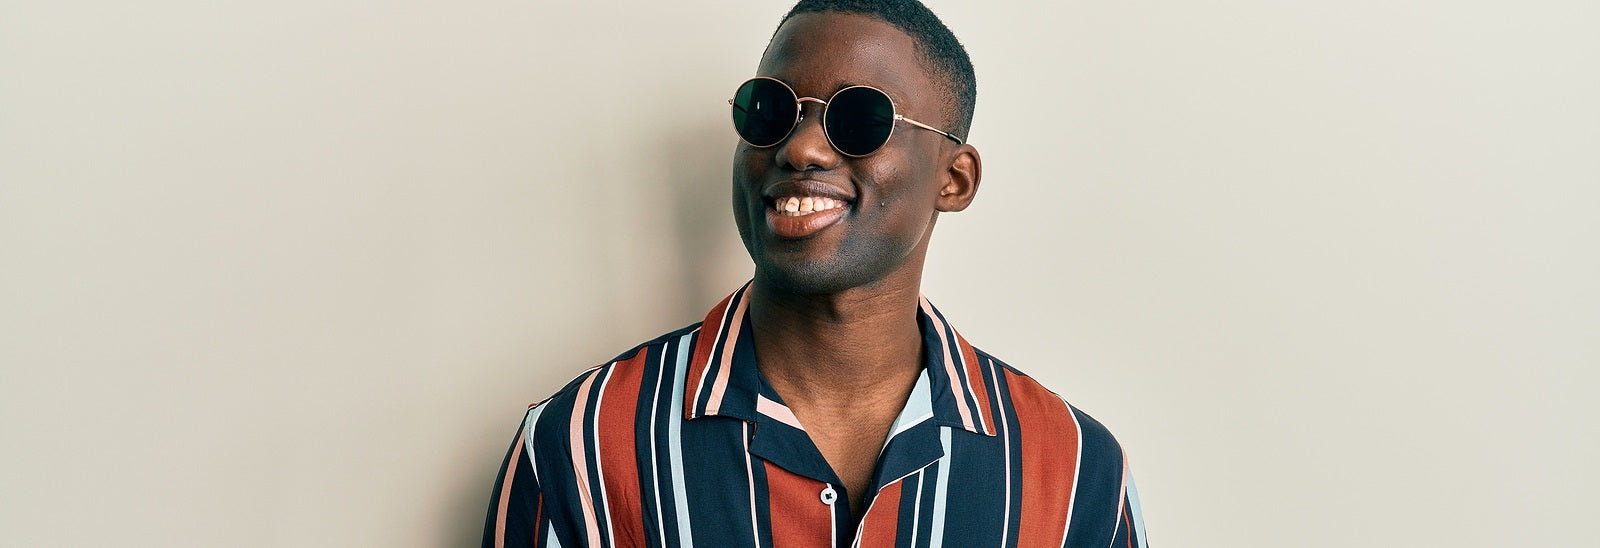 5 Ways To Keep Your Sunglasses Looking Brand Spanking New